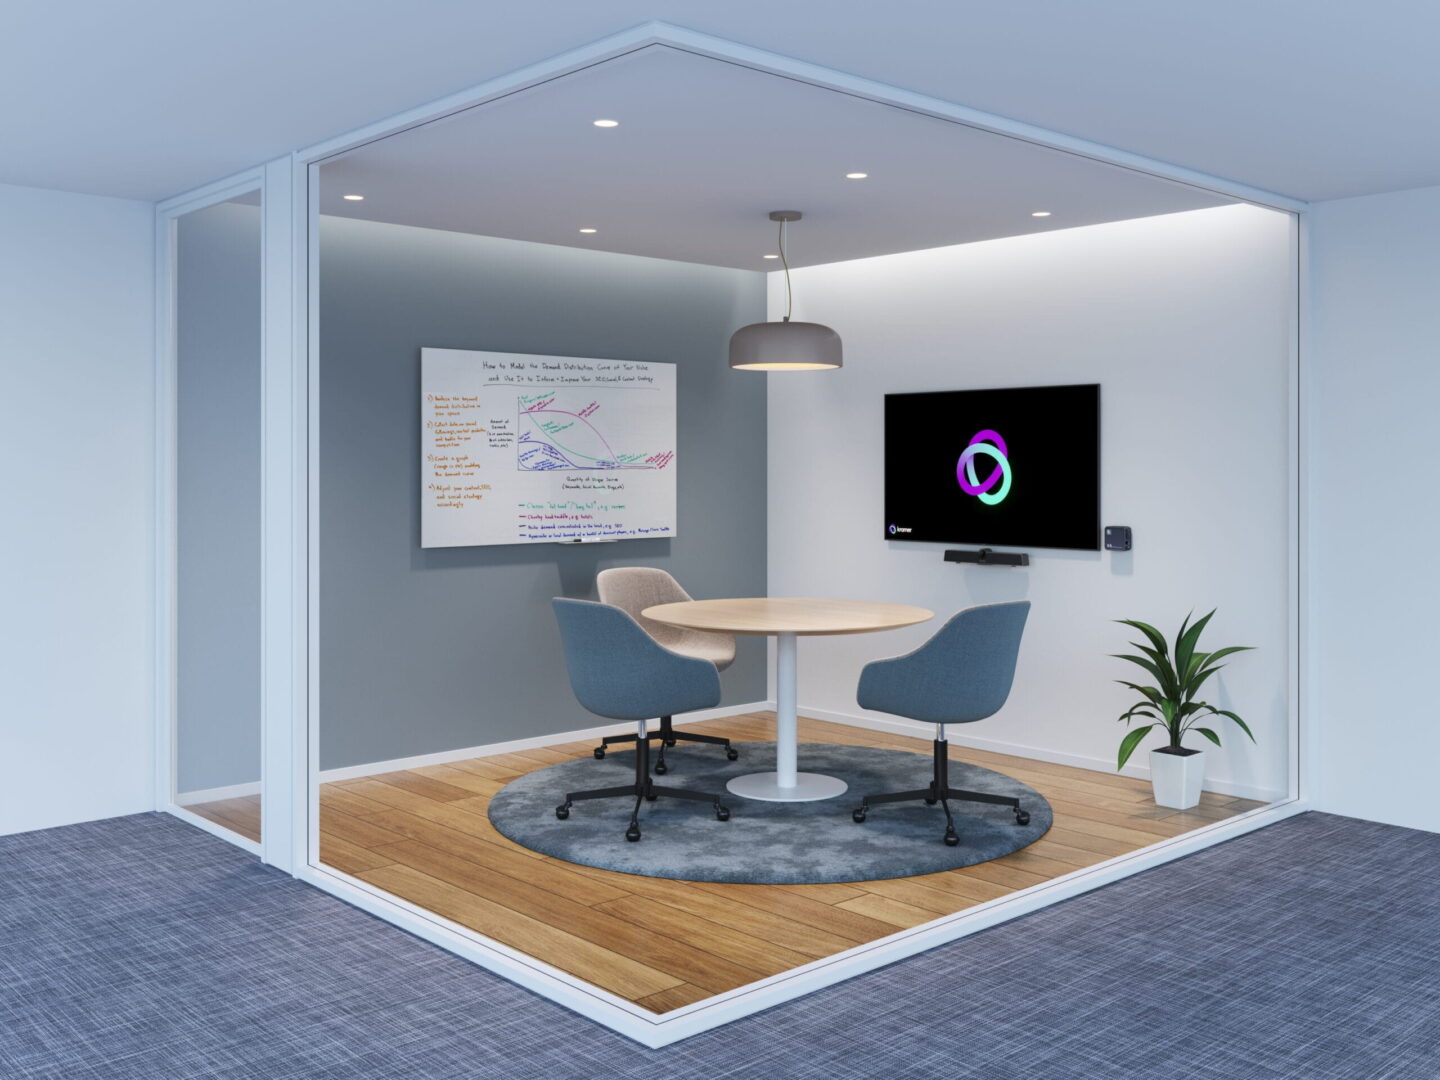 Wireless huddle room with Kramer's solutions installed in it